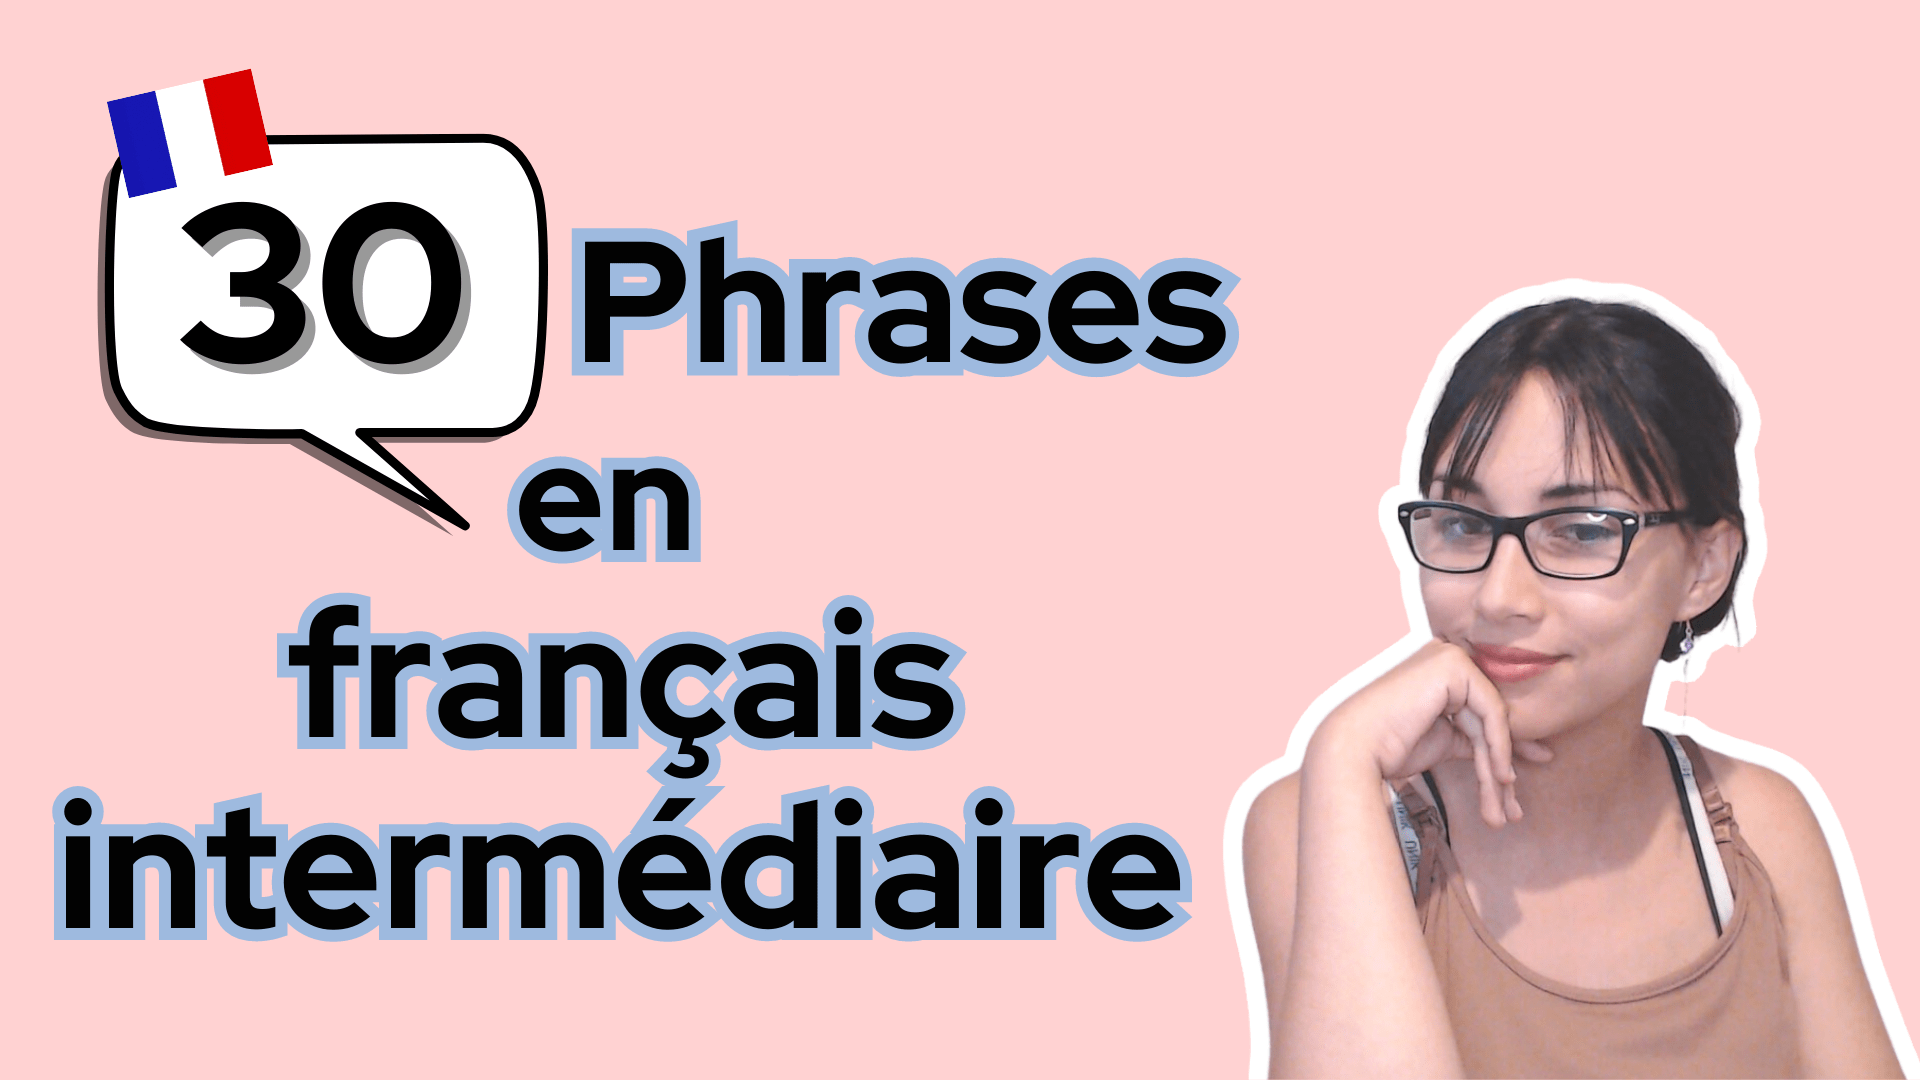 30 useful phrases for intermediate french learners